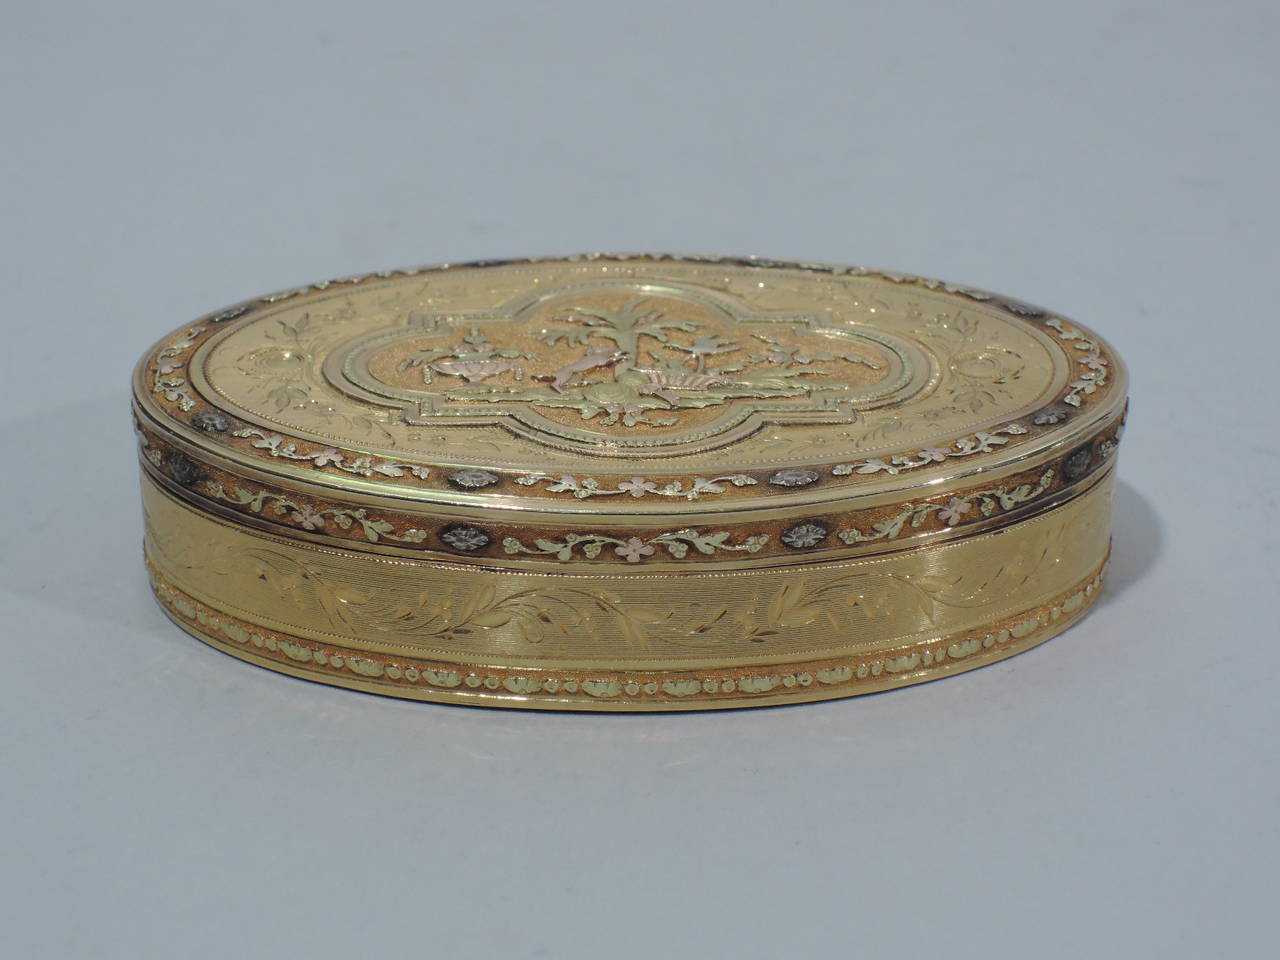 Swiss Gold Snuffbox, Neoclassical with Grecian Lamp Vase, circa 1810 ...